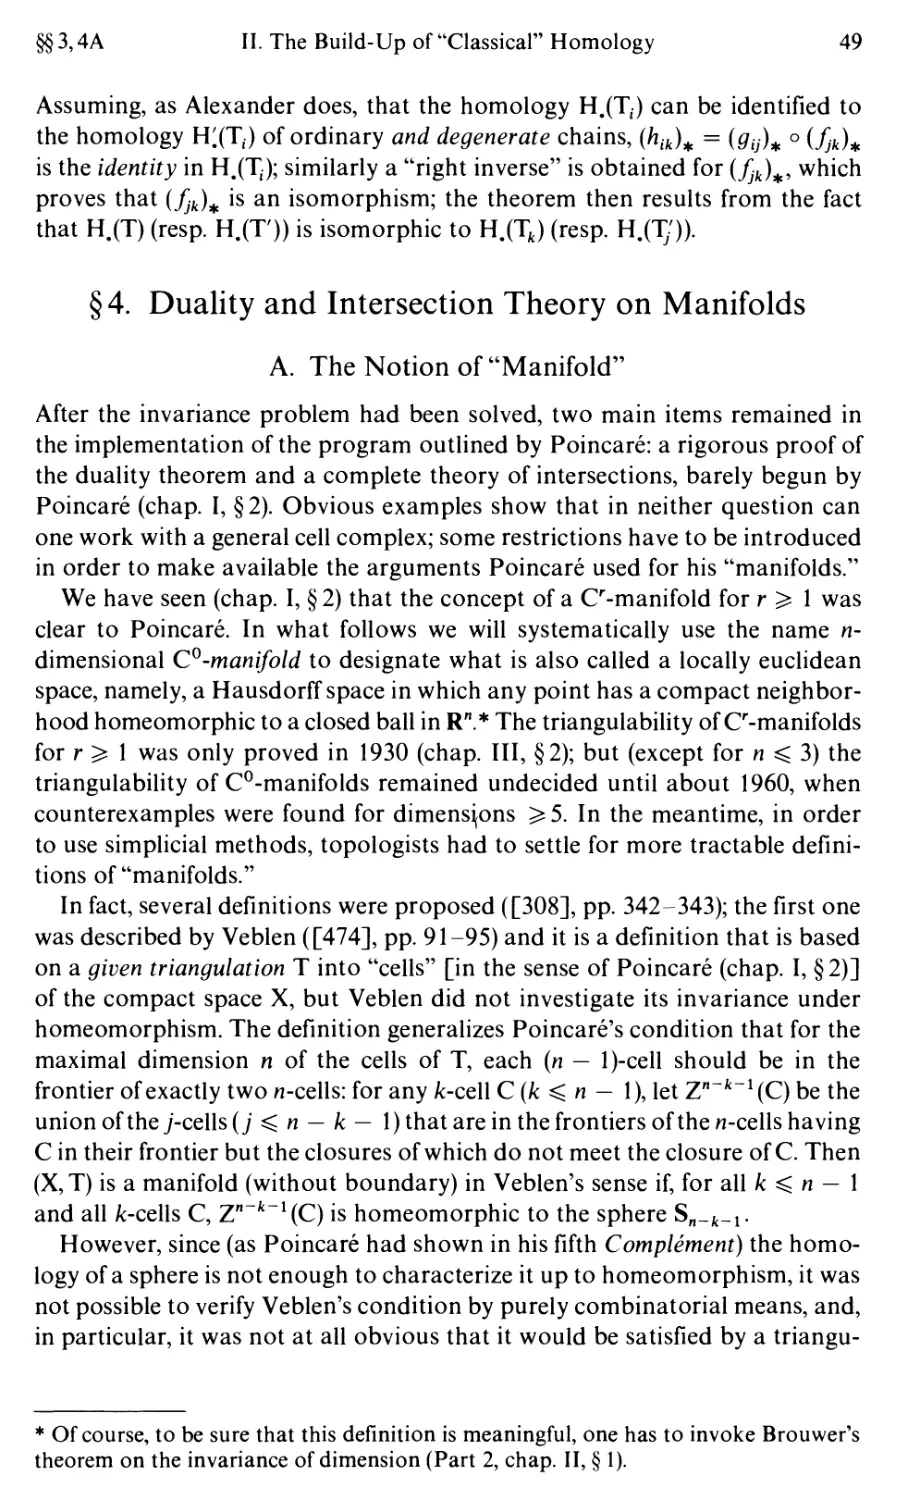 §4. Duality and Intersection Theory on Manifolds